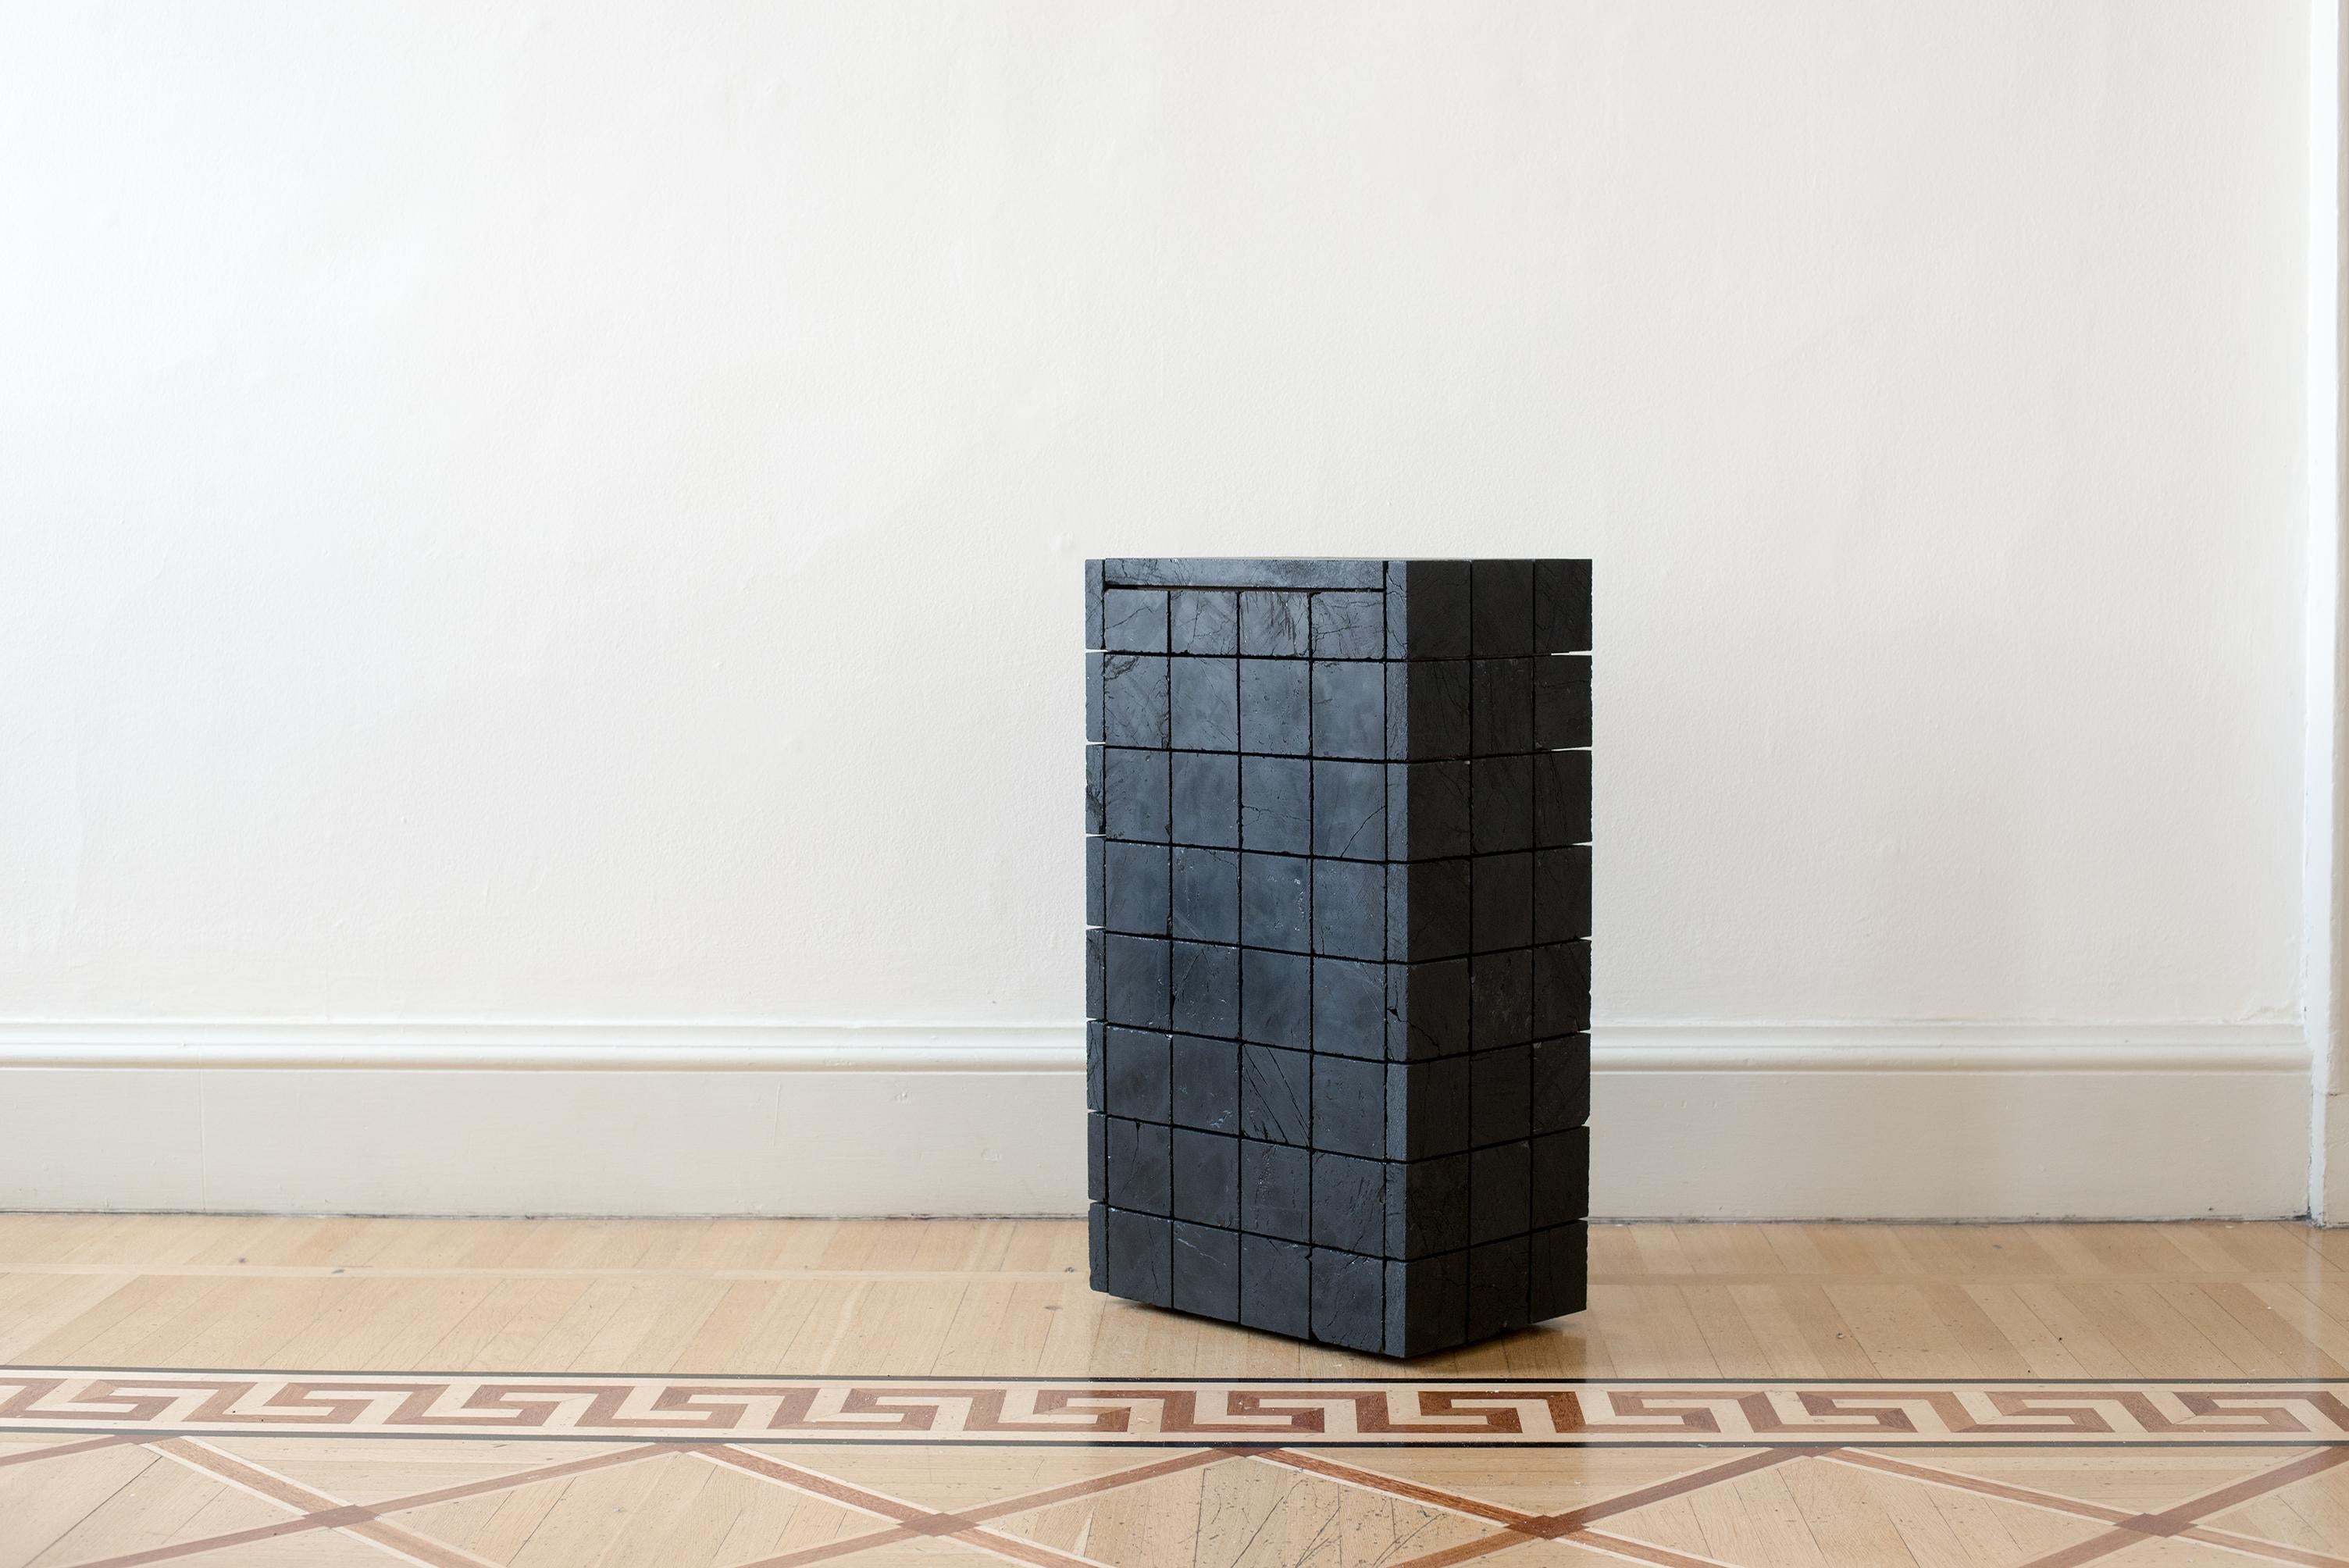 Console 018 by Jesper Eriksson
Dimensions: D 42.9 x W 27.9 x H 76.1 cm 
Materials: anthracite coal, wood frame
Weight: 60 kg

Jesper Eriksson (b.1990, Paris) is an artist & designer based in London, interested in work related to the human,